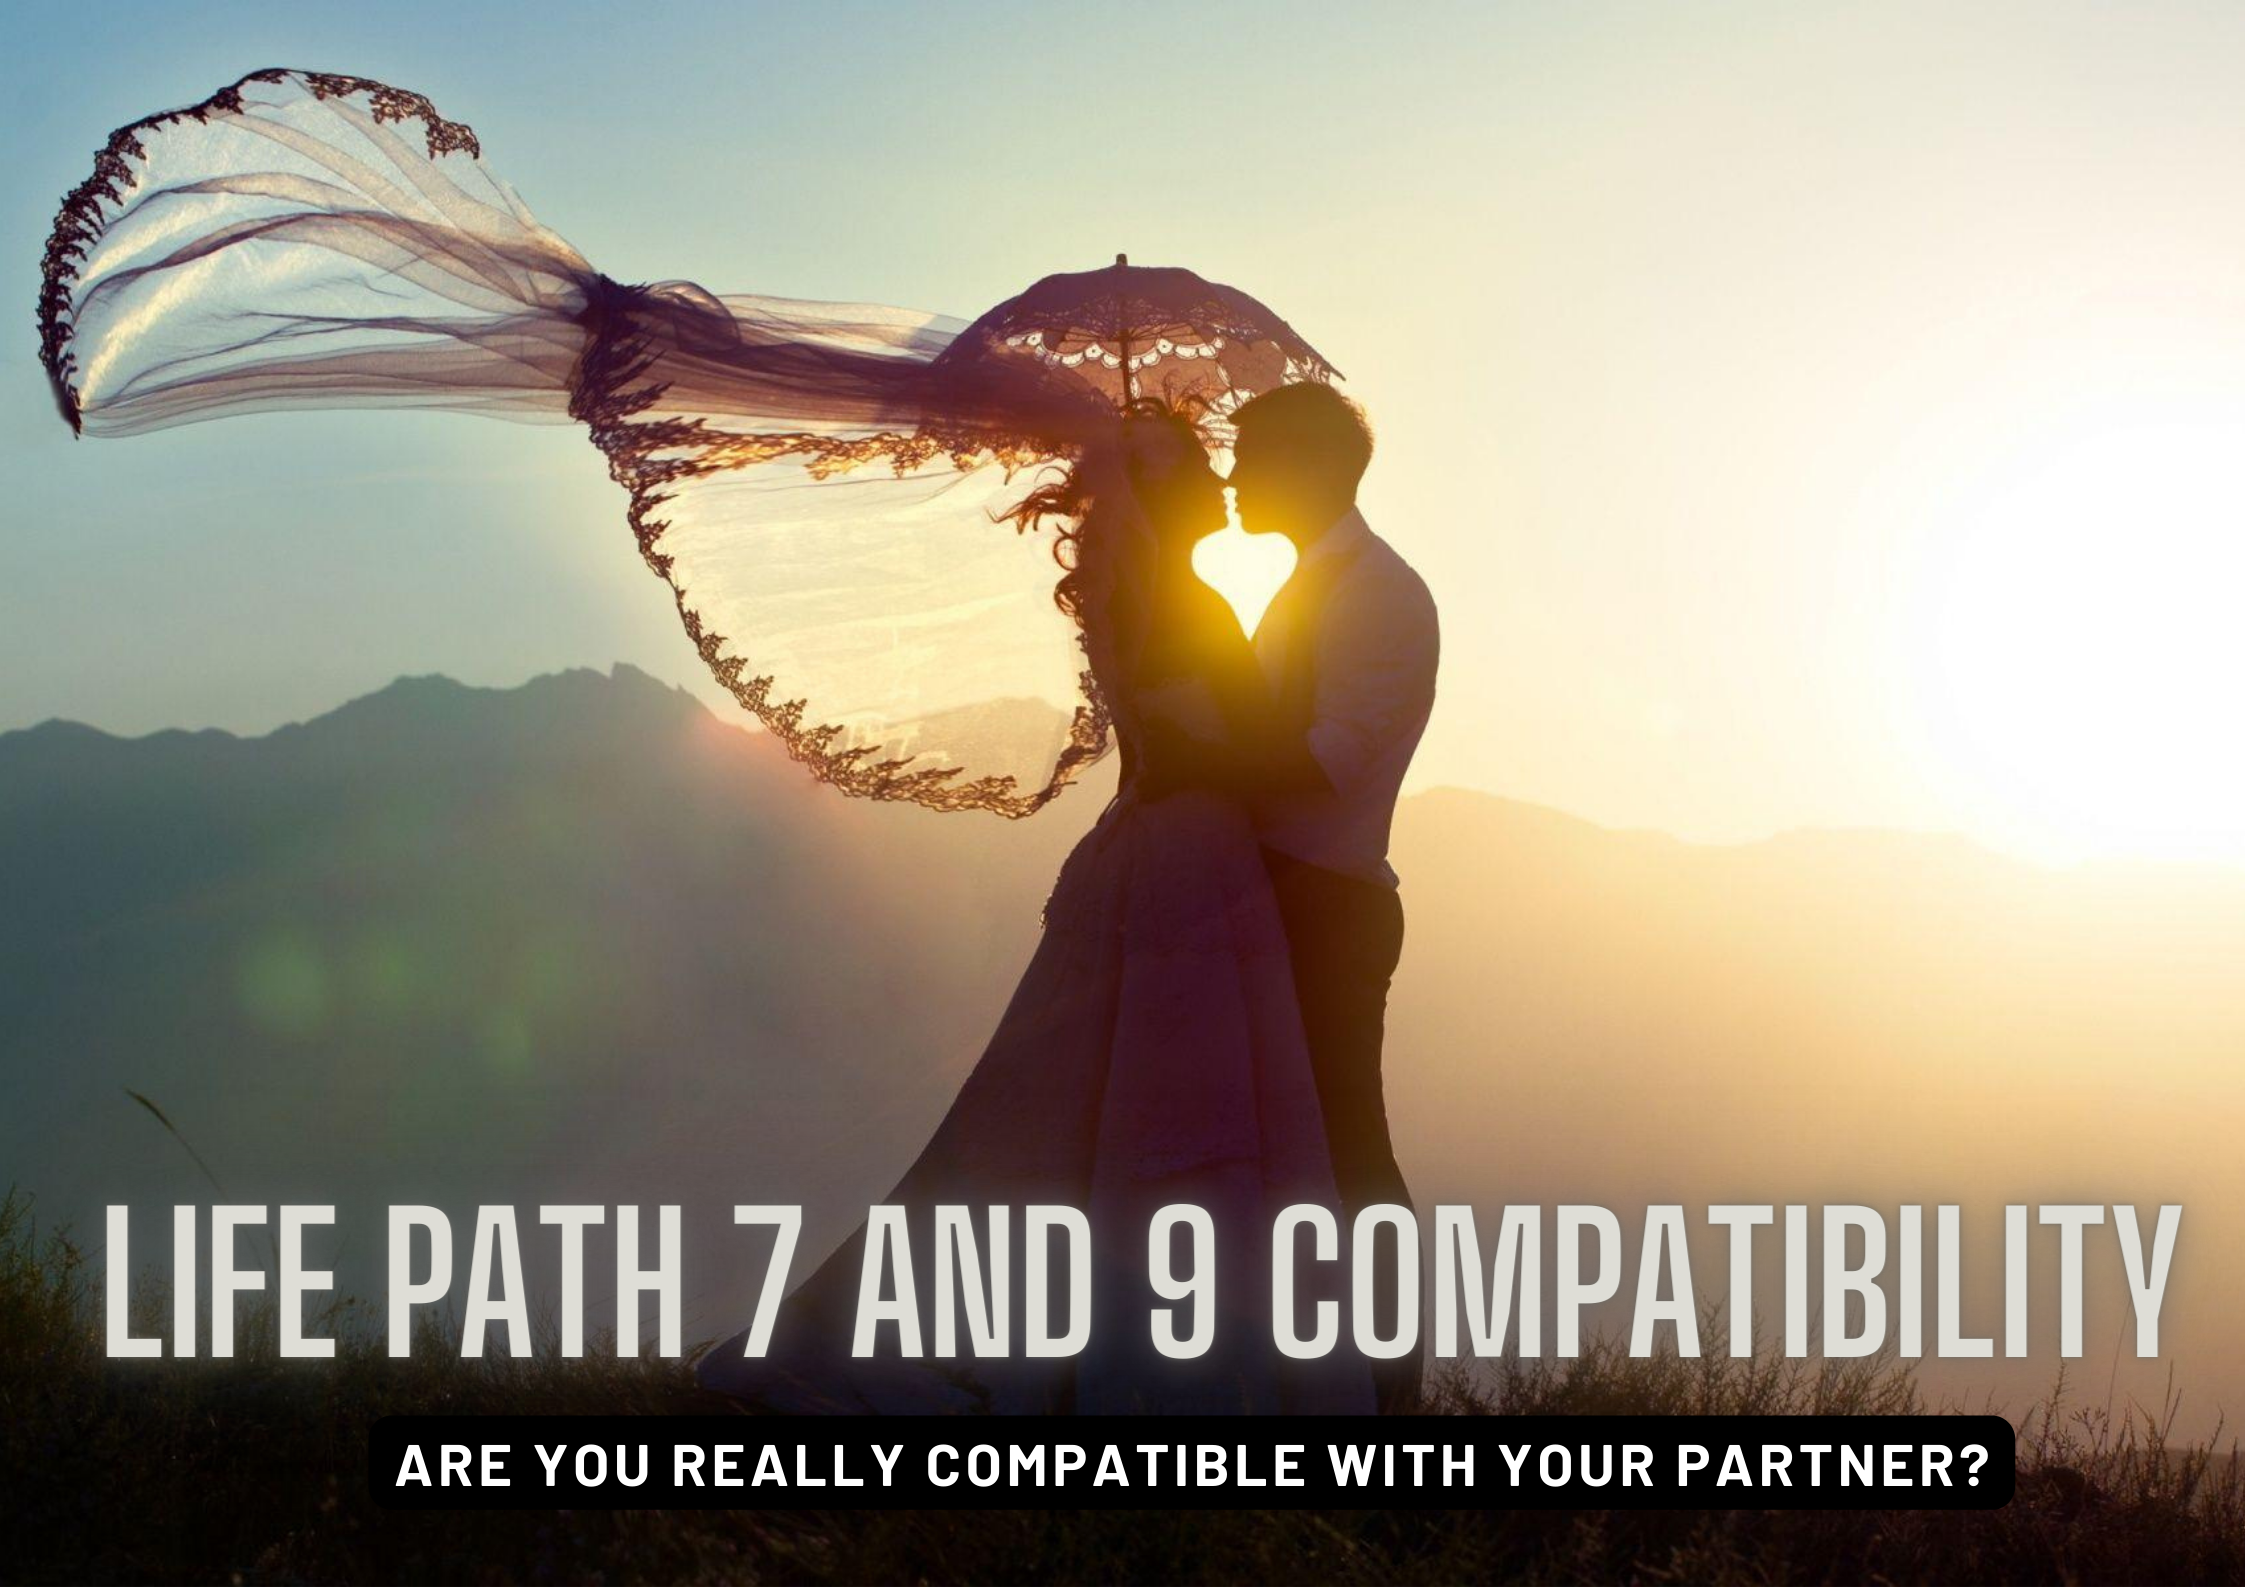 Life Path 7 And 9 Compatibility - Are You Really Compatible With Your Partner?